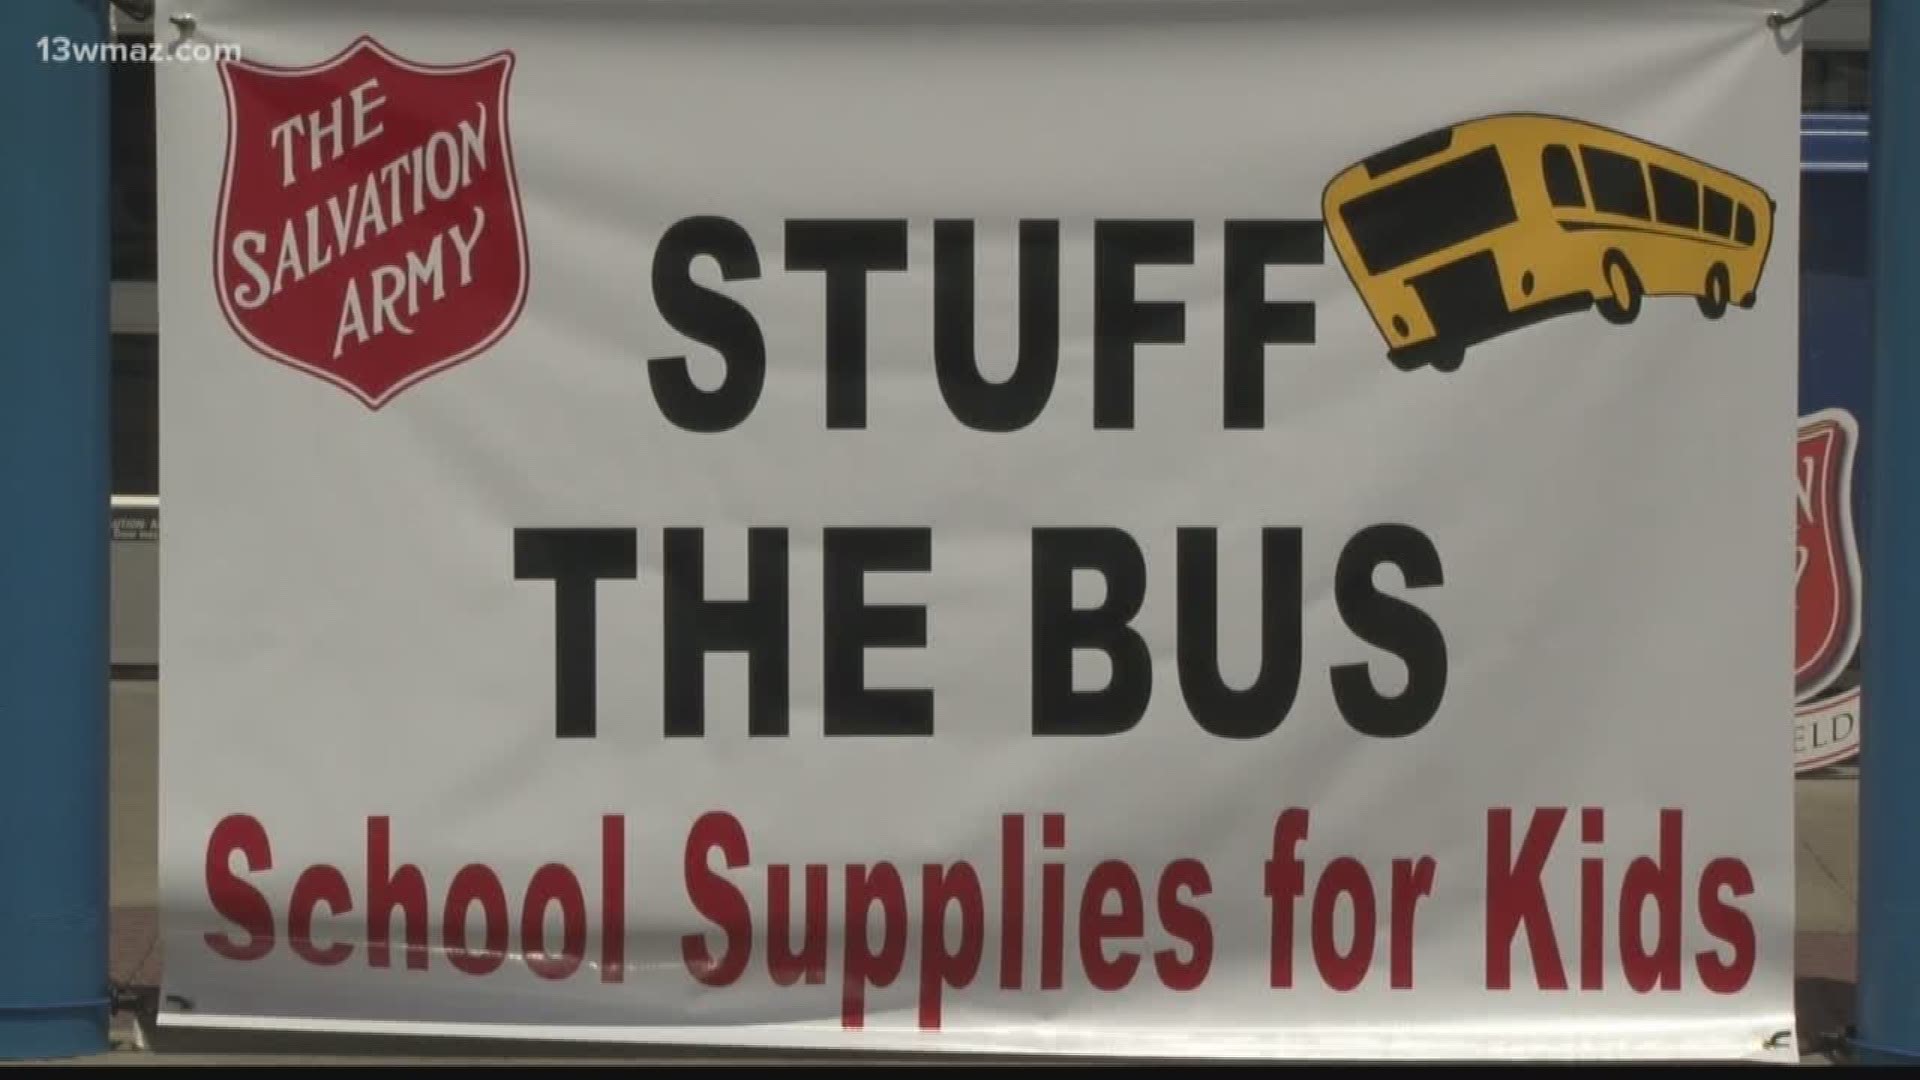 The Dublin Salvation Army Chapter teamed up with Walmart Saturday to make sure kids in Laurens County had all the supplies on their lists to head back to school. Shoppers could purchase items and leave them in bins for kids who need them.